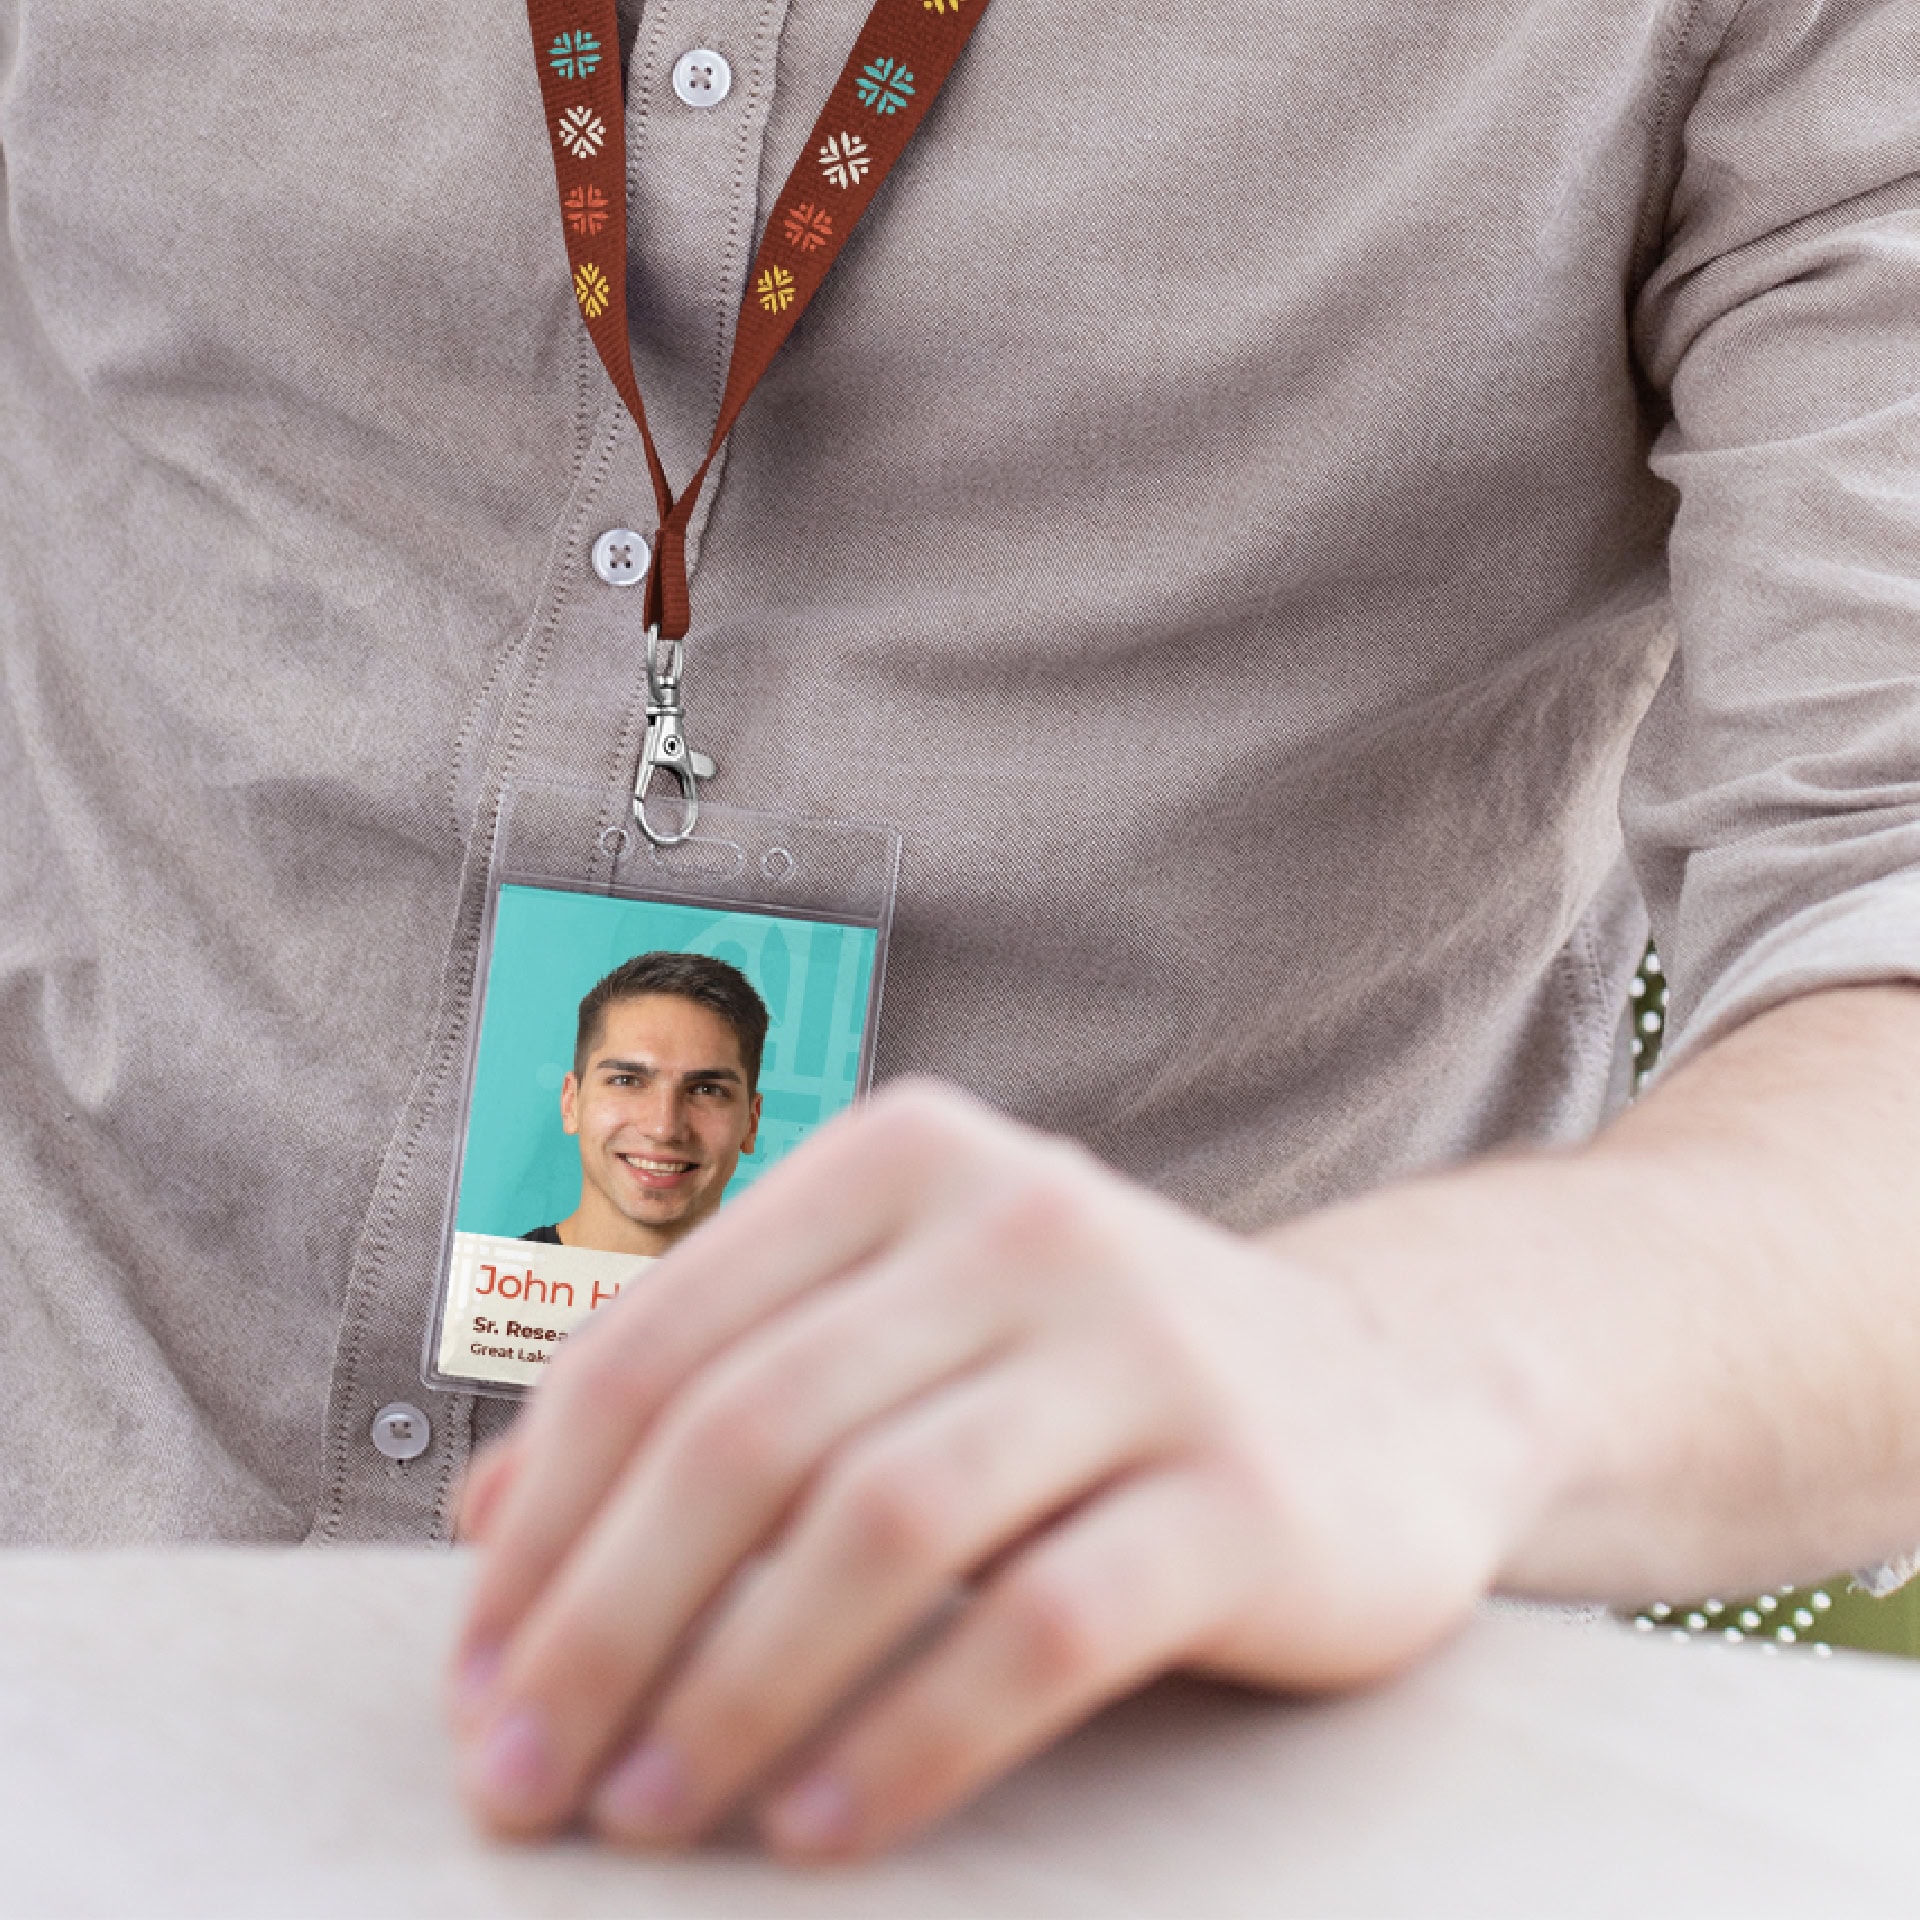 We see a zoomed in shot of a man's chest and arm resting on a table. There is a lanyard hanging from his neck; the name tag with the Center's branding can be seen with the man's accompanying headshot.